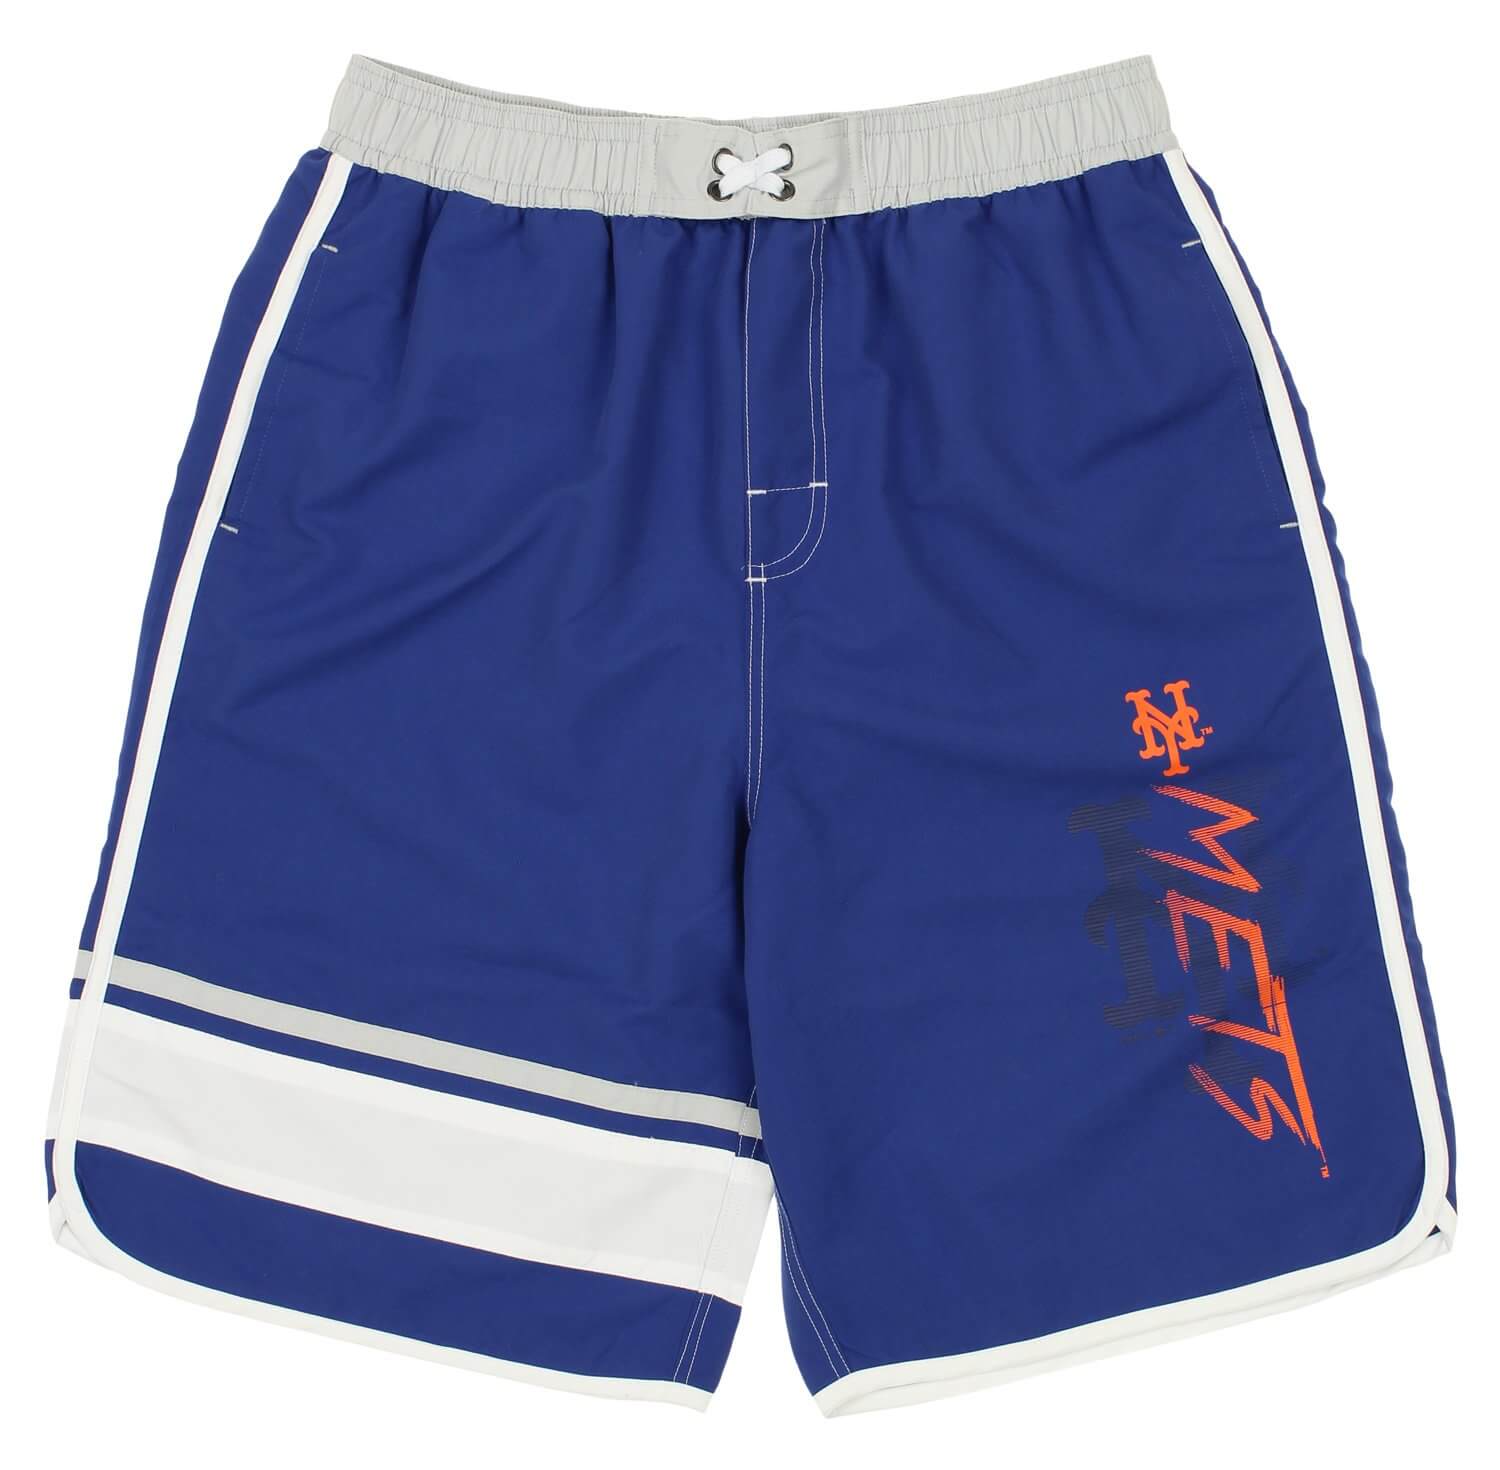  Outerstuff MLB Youth 8-20 Team Color Polyester